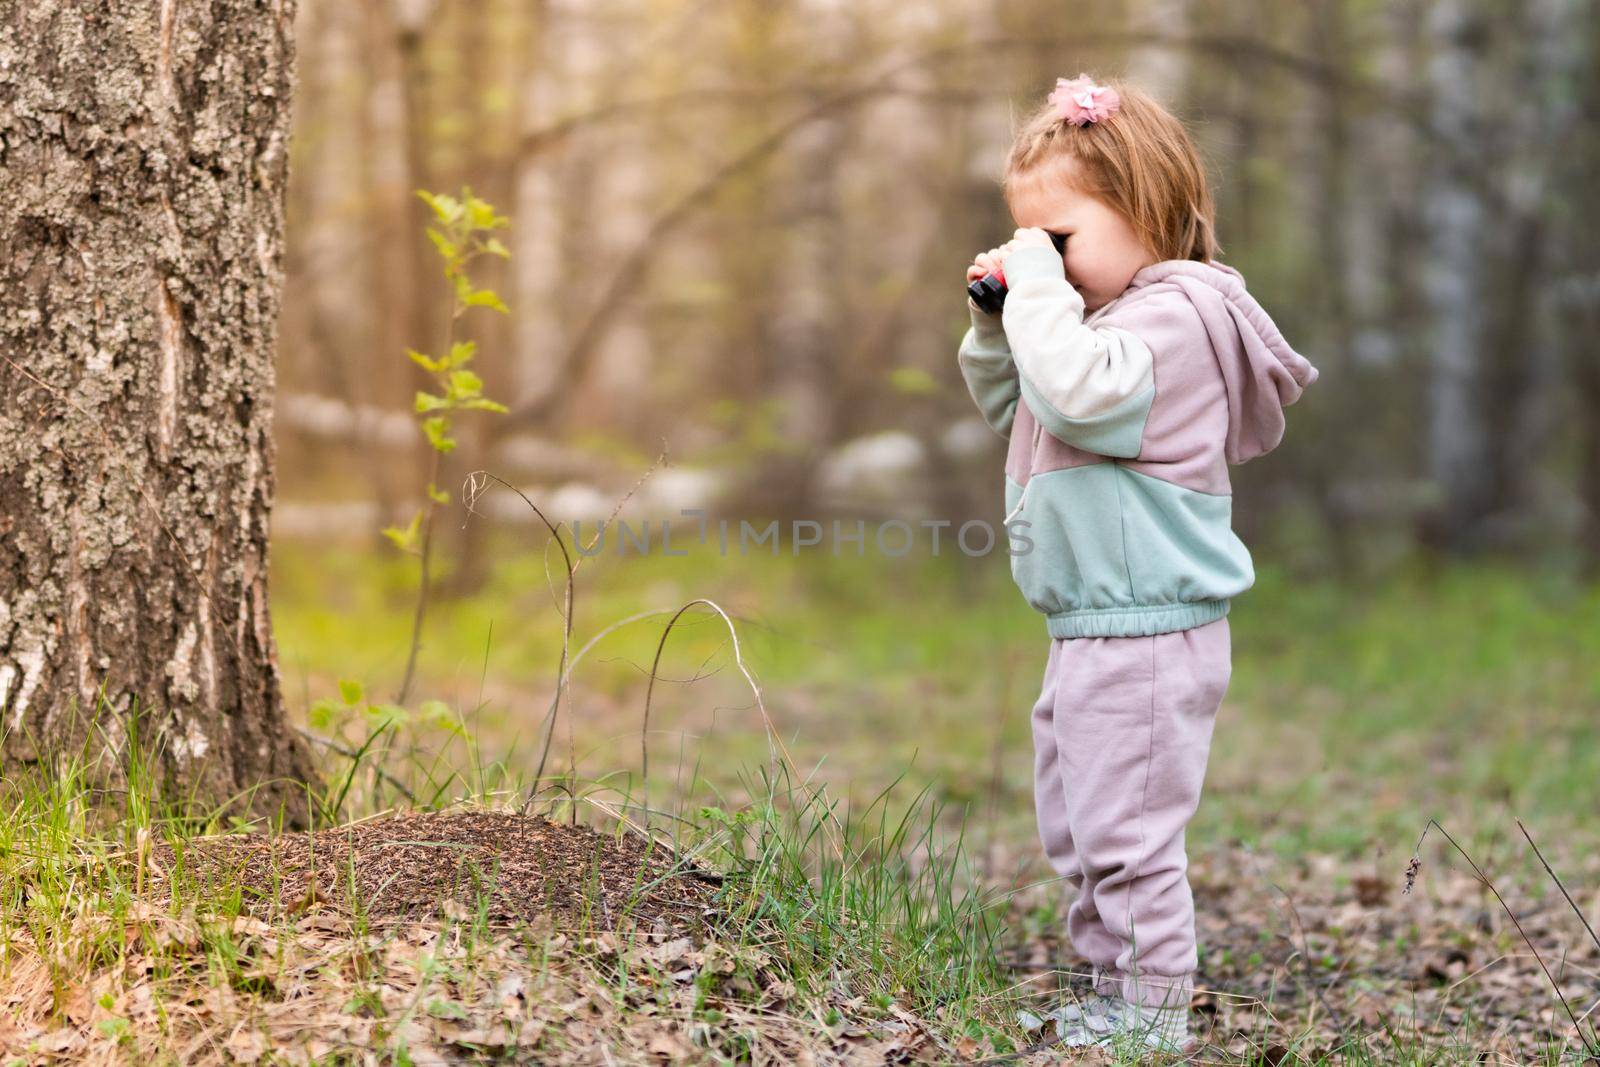 a girl in a birch grove has approached an anthill and is watching the ants through children's binoculars. It does not come close so as not to disturb the insects by olex